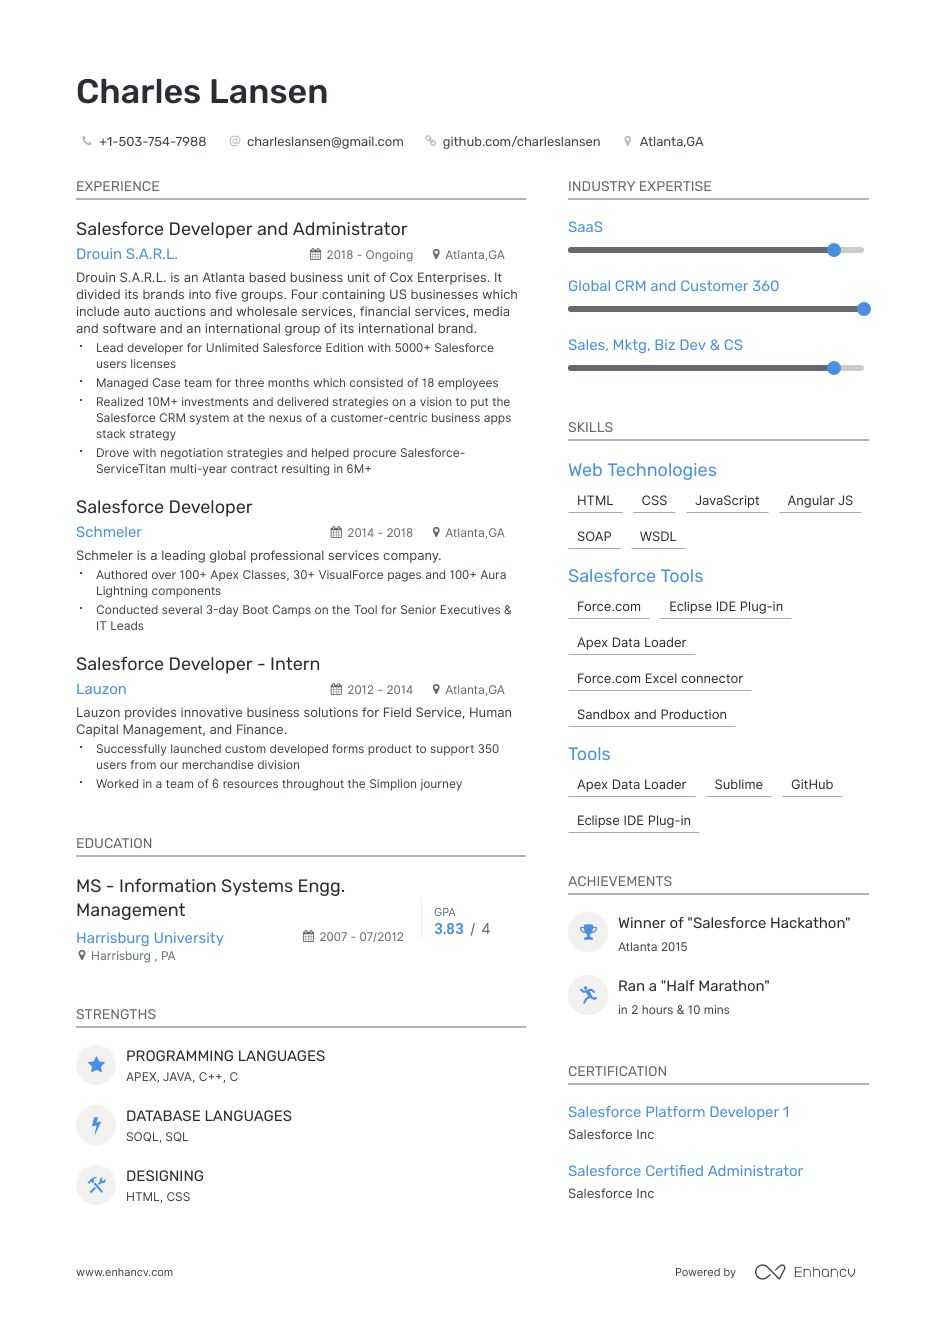 Salesforce Developer Resume Samples and Writing Guide for 2021